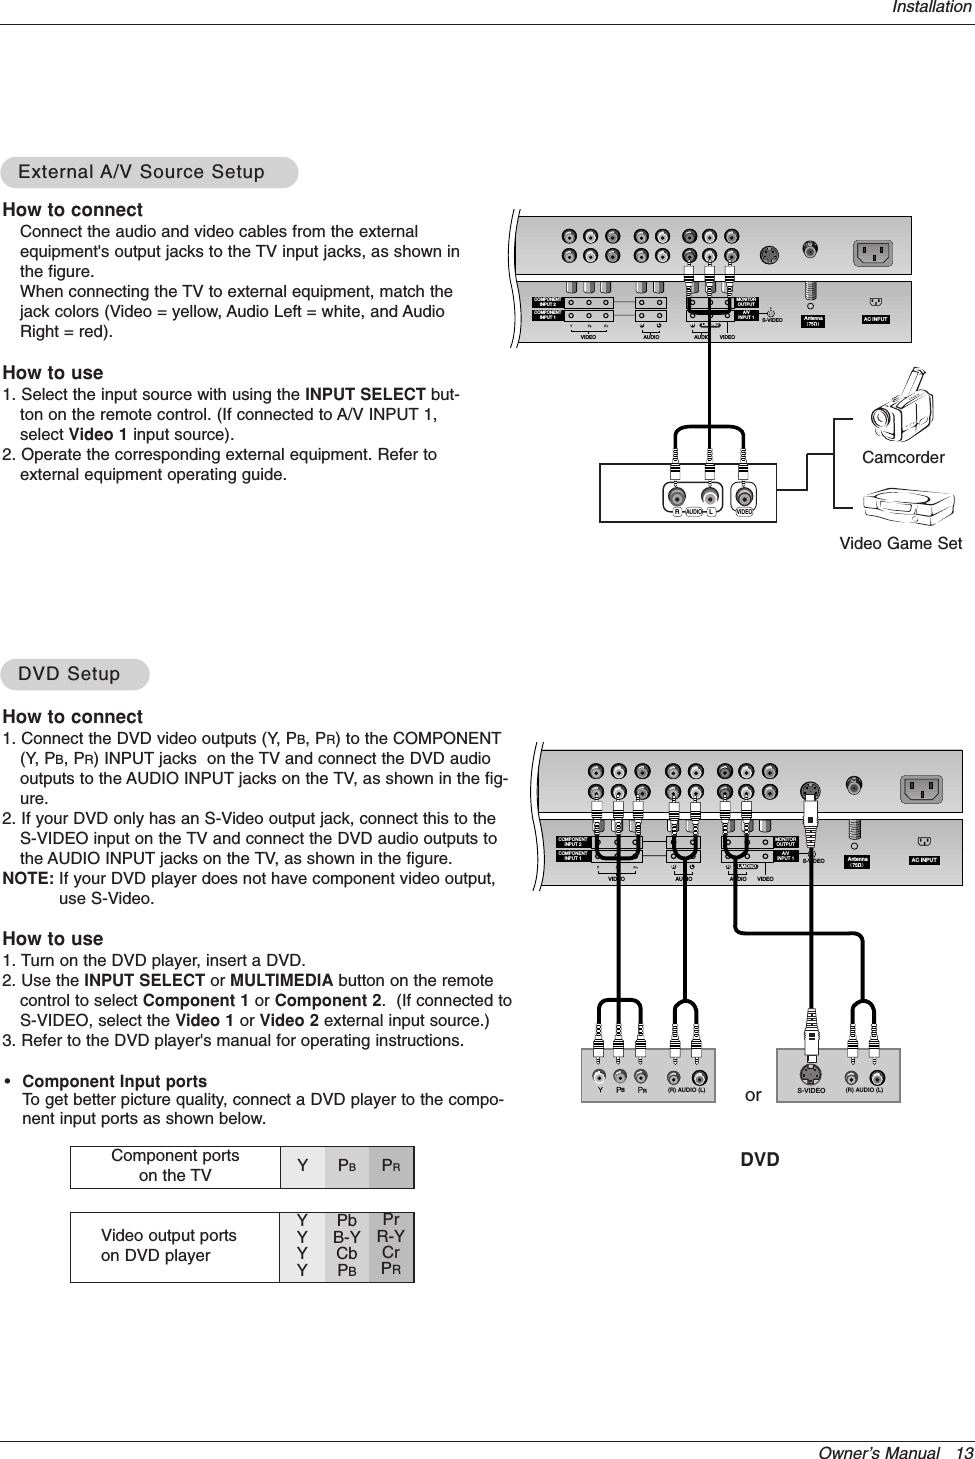 Owner’s Manual   13Installation•Component Input portsTo get better picture quality, connect a DVD player to the compo-nent input ports as shown below.How to connectConnect the audio and video cables from the externalequipment&apos;s output jacks to the TV input jacks, as shown inthe figure. When connecting the TV to external equipment, match thejack colors (Video = yellow, Audio Left = white, and AudioRight = red).How to use1. Select the input source with using the INPUT SELECT but-ton on the remote control. (If connected to A/V INPUT 1,select Video 1 input source).2. Operate the corresponding external equipment. Refer toexternal equipment operating guide.Component ports on the TV YPBPRVideo output ports on DVD playerYYYYPbB-YCbPBPrR-YCrPRHow to connect1. Connect the DVD video outputs (Y, PB, PR) to the COMPONENT(Y, PB, PR) INPUT jacks  on the TV and connect the DVD audiooutputs to the AUDIO INPUT jacks on the TV, as shown in the fig-ure.2. If your DVD only has an S-Video output jack, connect this to theS-VIDEO input on the TV and connect the DVD audio outputs tothe AUDIO INPUT jacks on the TV, as shown in the figure.NOTE: If your DVD player does not have component video output,use S-Video.How to use1. Turn on the DVD player, insert a DVD.2. Use the INPUT SELECT or MULTIMEDIA button on the remotecontrol to select Component 1 or Component 2.  (If connected toS-VIDEO, select the Video 1 or Video 2 external input source.)3. Refer to the DVD player&apos;s manual for operating instructions.External External A/V Source SetupA/V Source SetupDVD SetupDVD SetupAntennaS-VIDEO AC INPUTAUDIOVIDEOCOMPONENTINPUT 2COMPONENTINPUT 1MONITOROUTPUTA/VINPUT 1RLAUDIO VIDEORL/MONORLAUDIO VIDEOAntennaS-VIDEO AC INPUTAUDIOVIDEOCOMPONENTINPUT 2COMPONENTINPUT 1MONITOROUTPUTA/VINPUT 1RLAUDIO VIDEORL/MONOBR(R) AUDIO (L) (R) AUDIO (L)S-VIDEODVDorCamcorderVideo Game Set